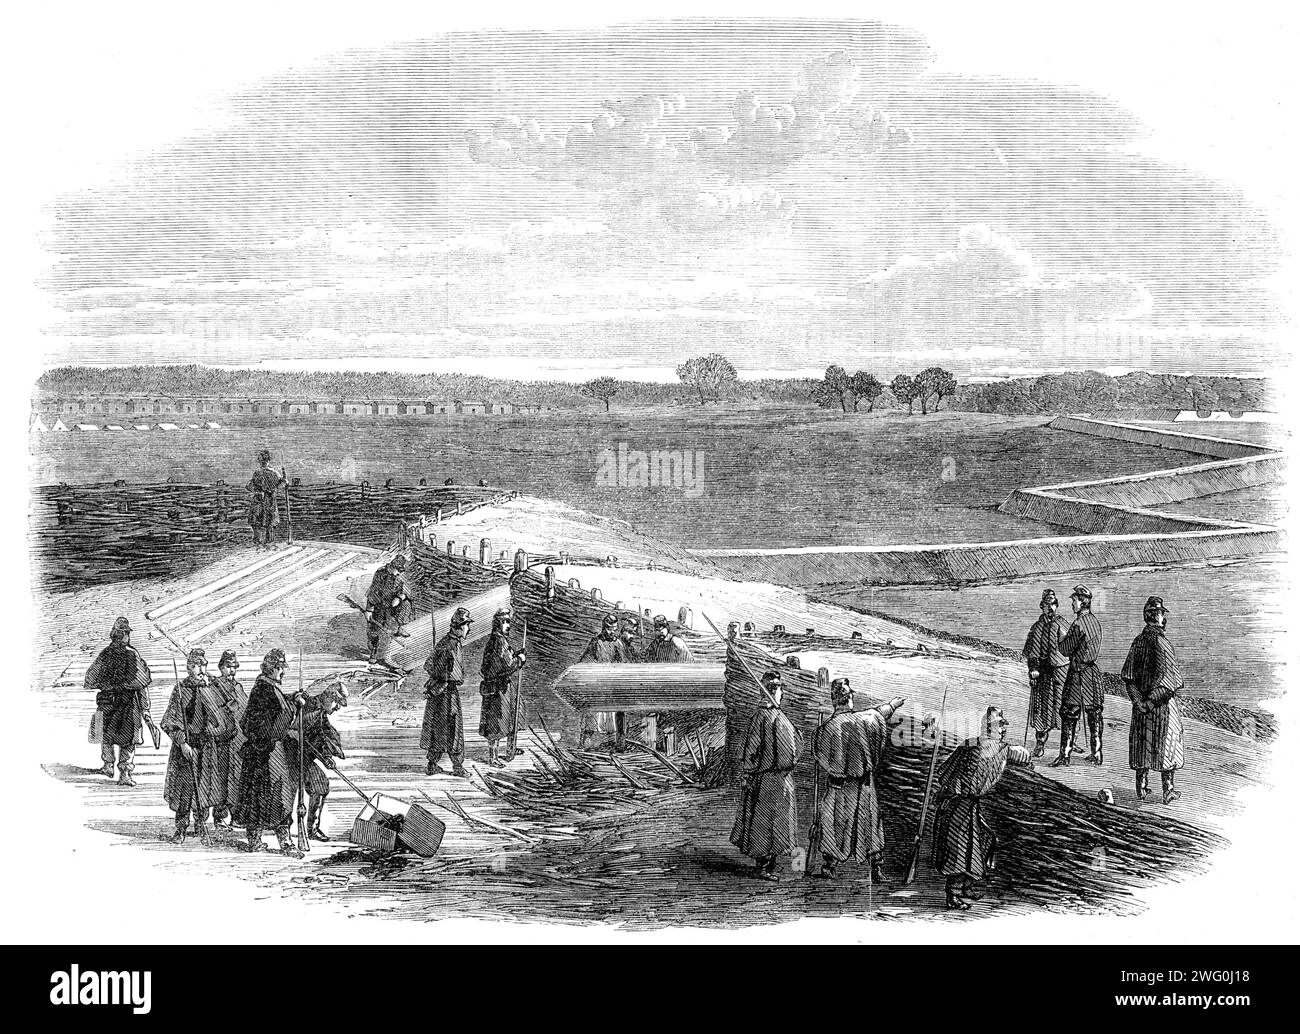 The Civil War in America: a portion of the abandoned Confederate works and camp at Centreville - from a sketch by our special artist, 1862. 'A toIerably good notion of the strength of the Confederate works at Centreville may be obtained from our Engraving...It shows two of the redoubts, with the connecting links of rifle-pits and covered ways which extend along the crests of hills for an immense distance, making the position seemingly impregnable with good troops to hold it. The fortifications at Manassas are nothing in comparison with these. Centreville heights is the place which has held the Stock Photo